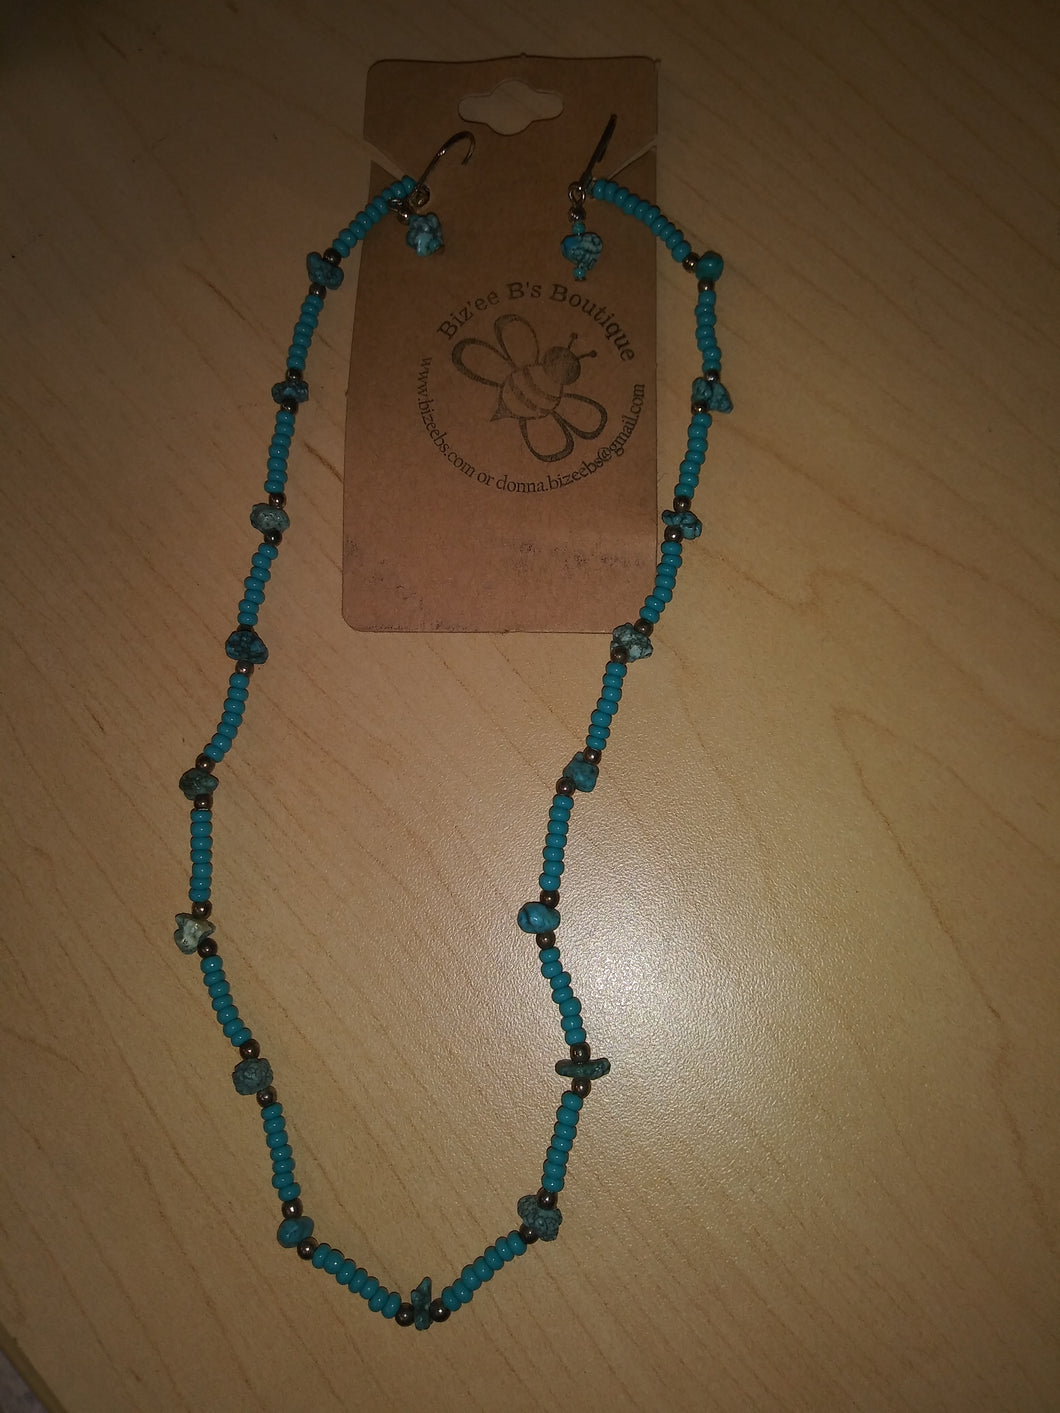 Turquoise Necklace And Earrings